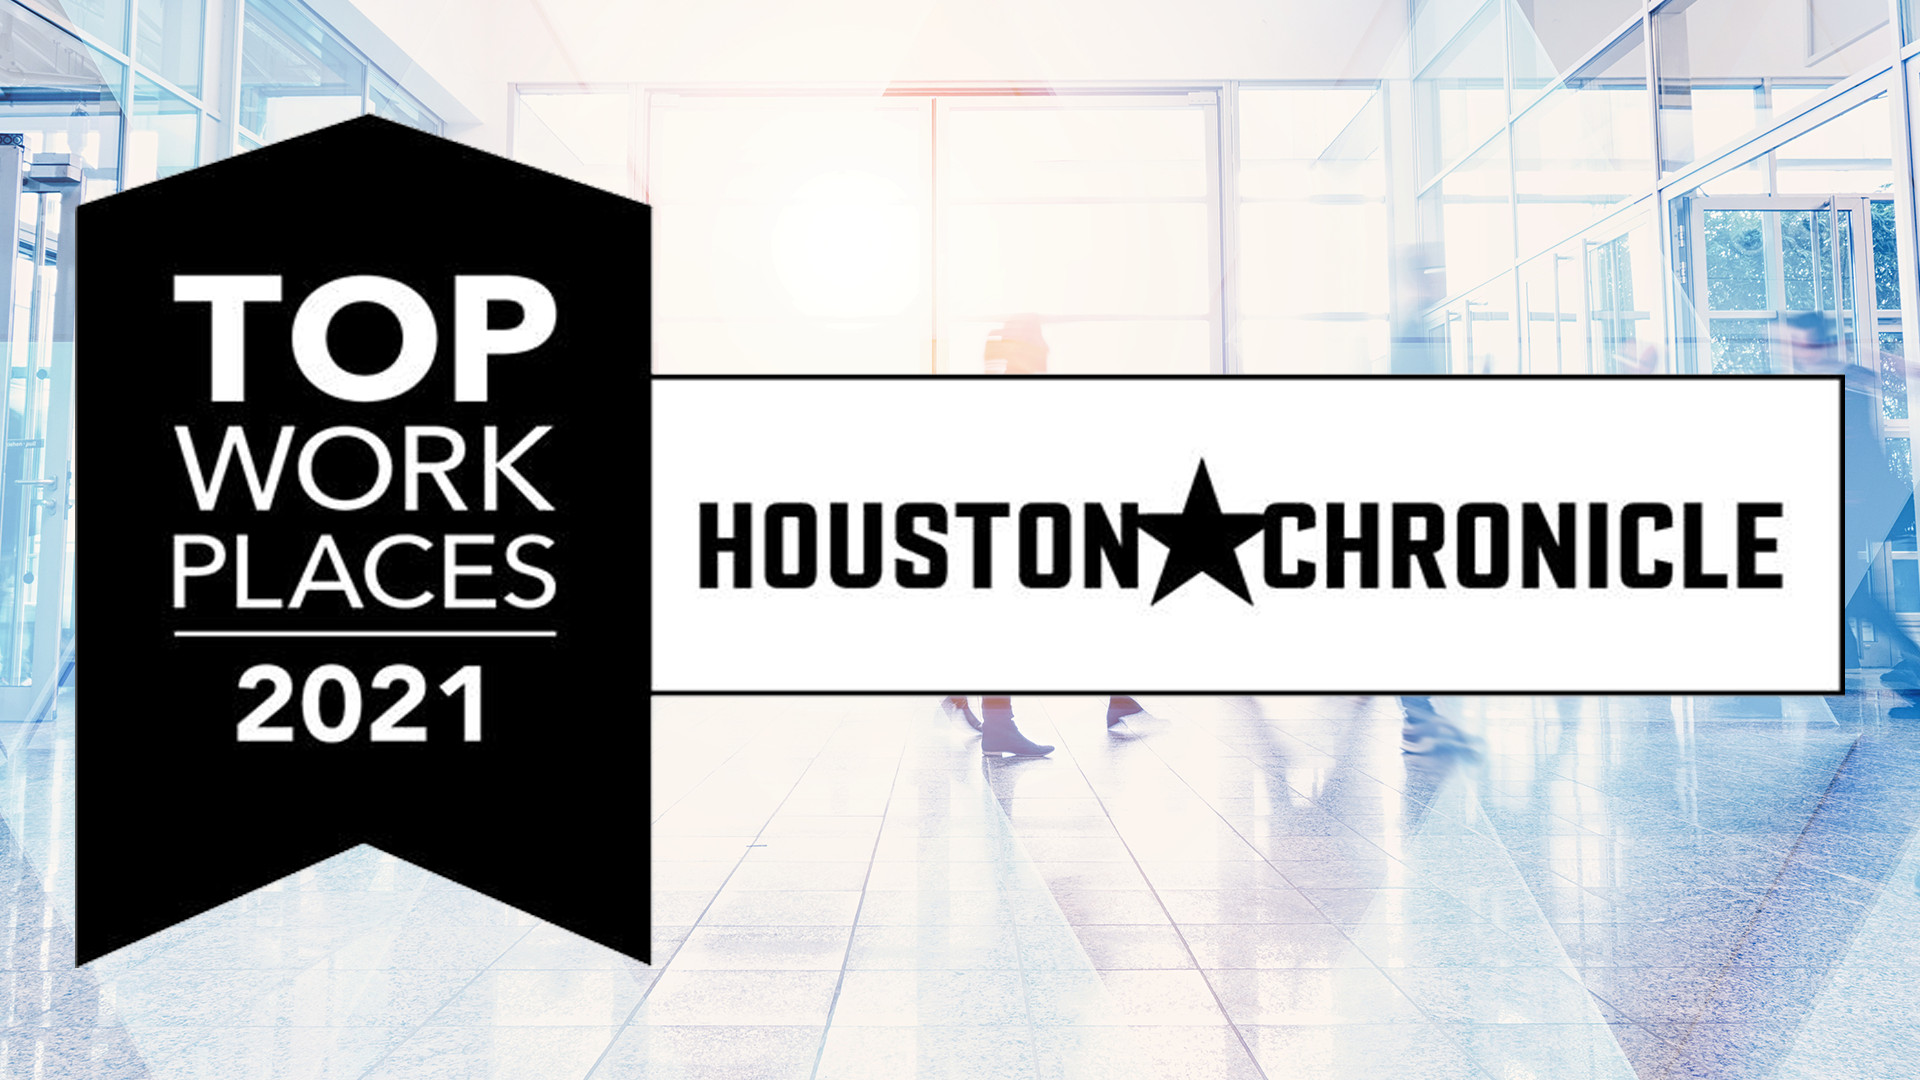 Top Work Places 2021 | Houston Chronicle